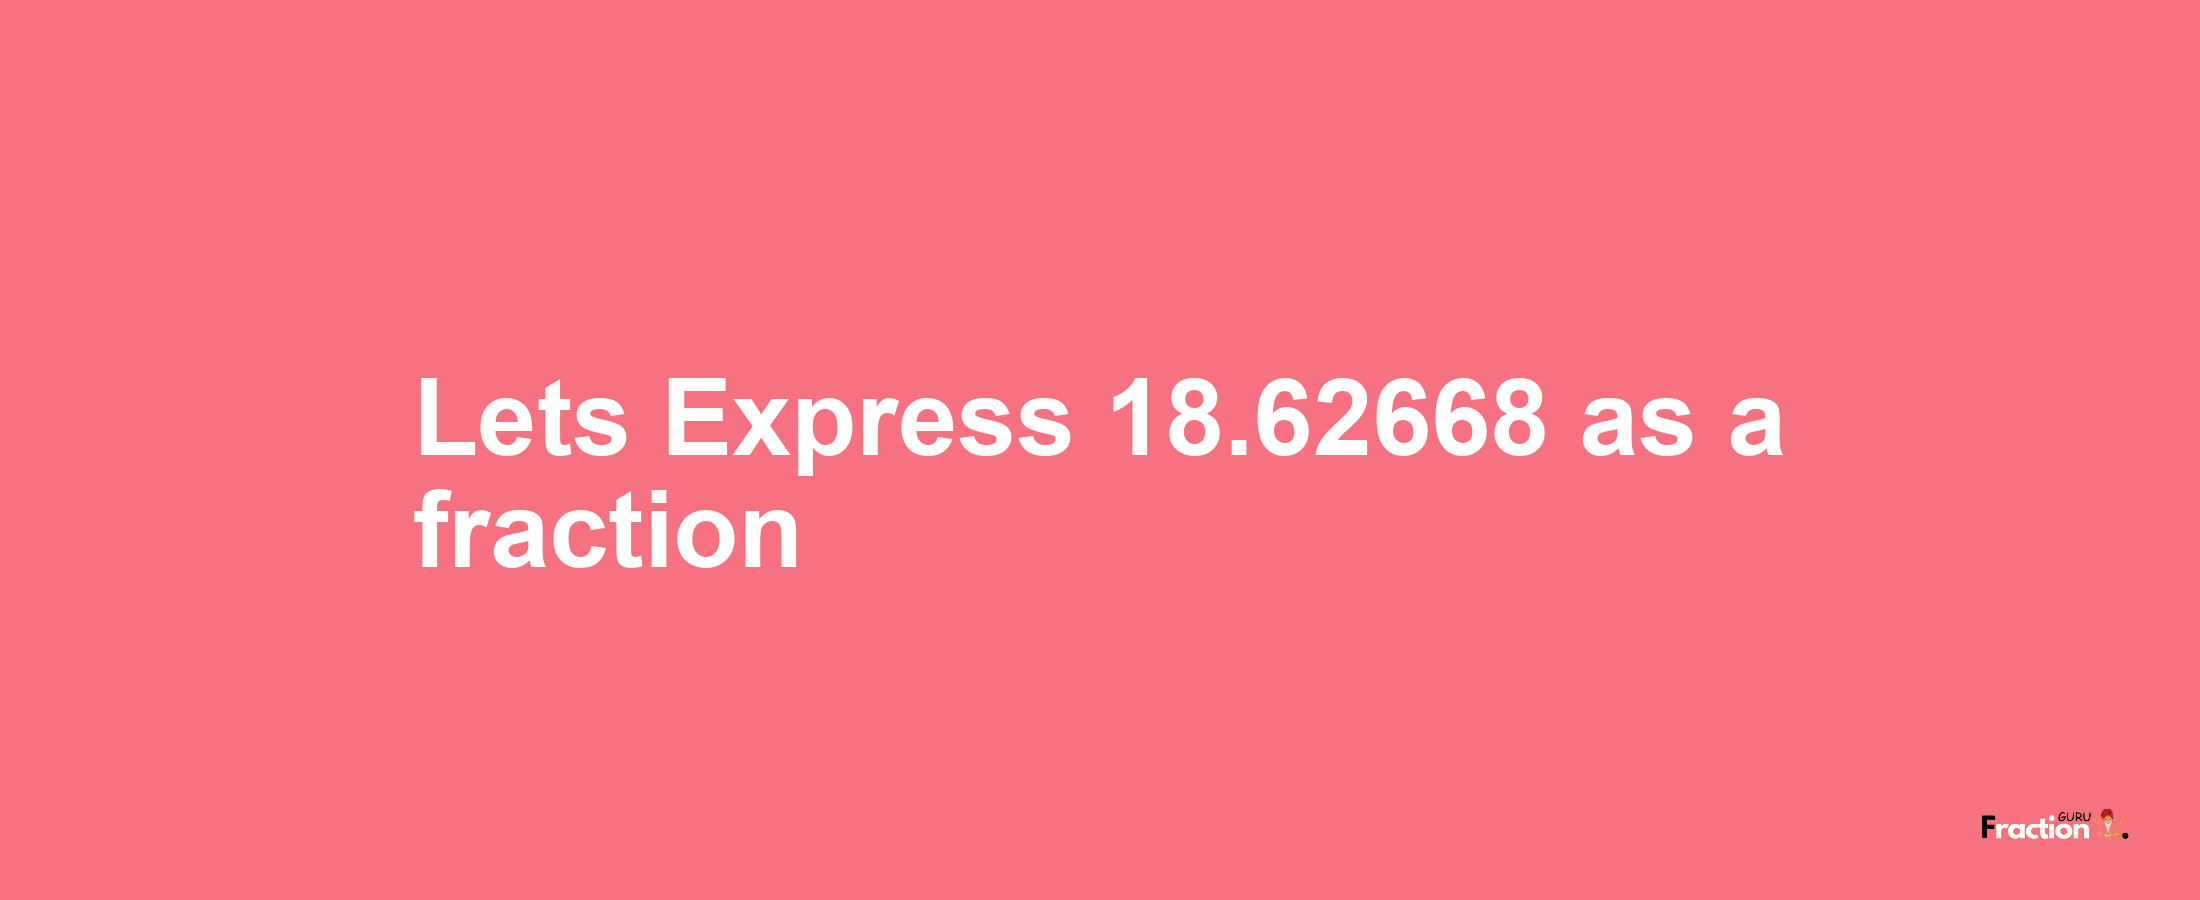 Lets Express 18.62668 as afraction